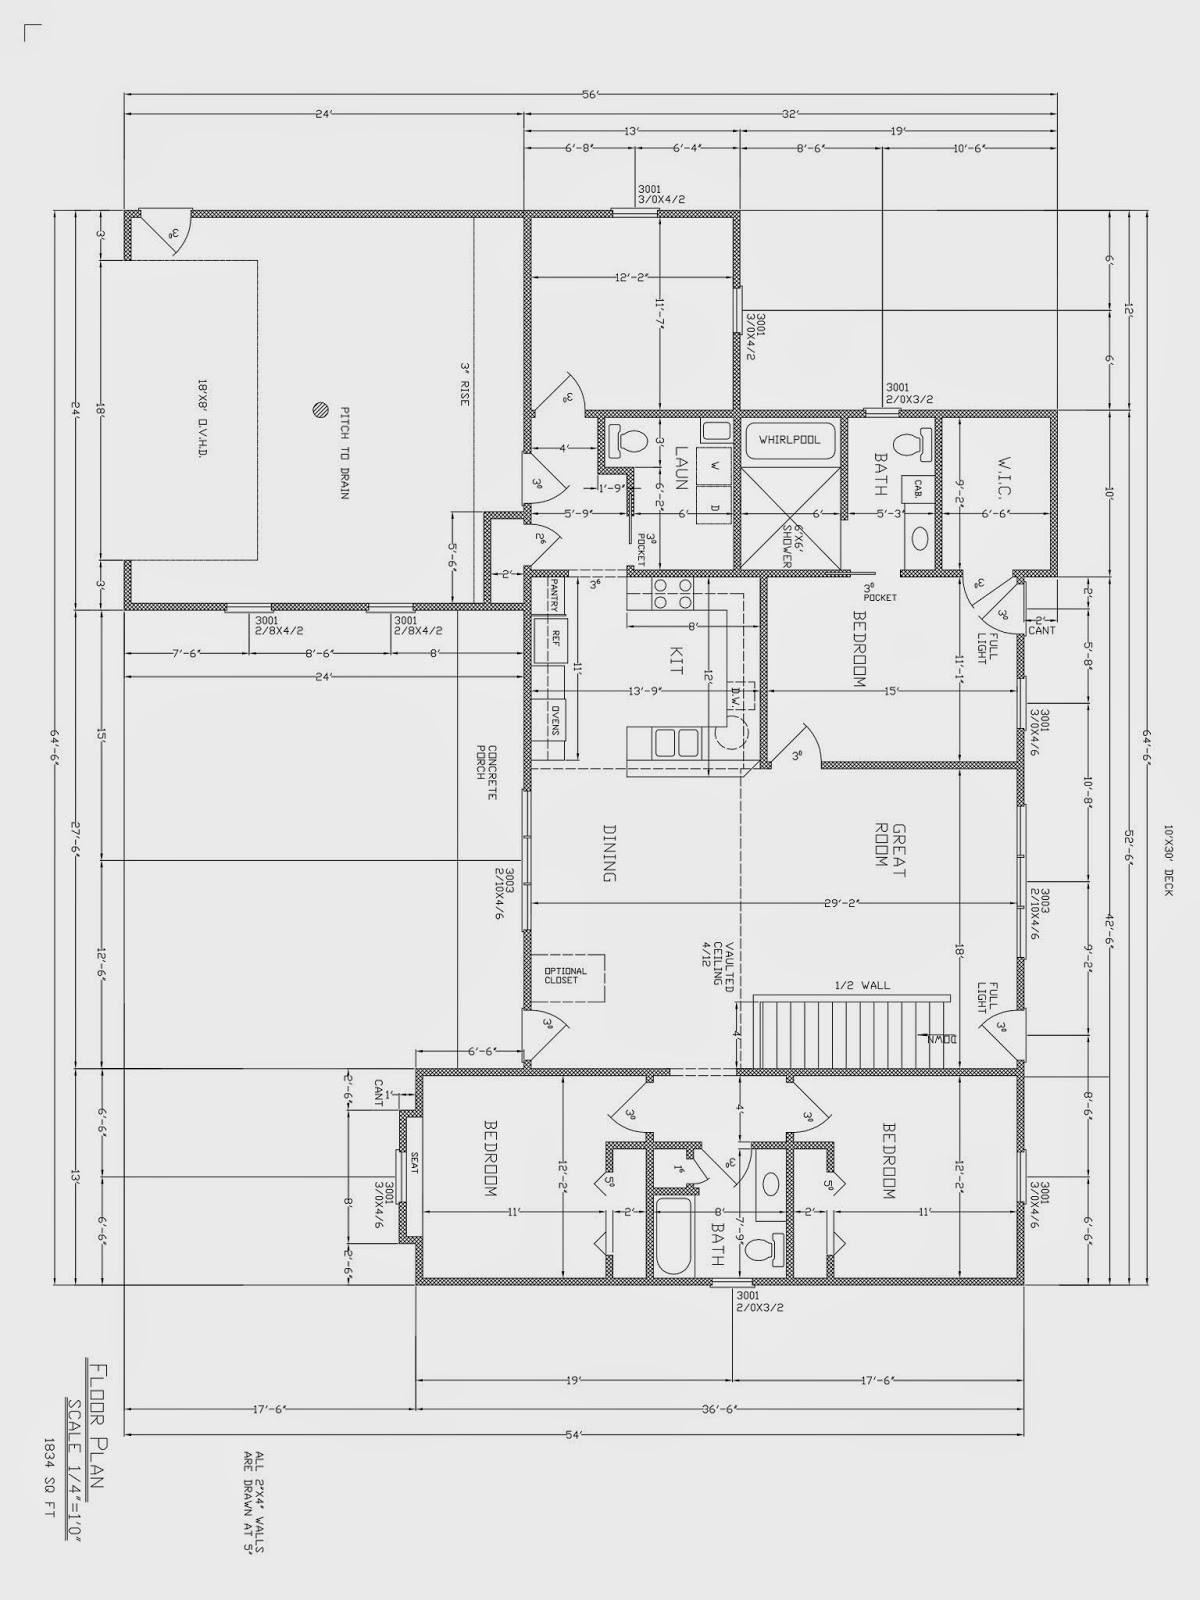 3 Bedroom Wheelchair Accessible  House  Plans  Universal 